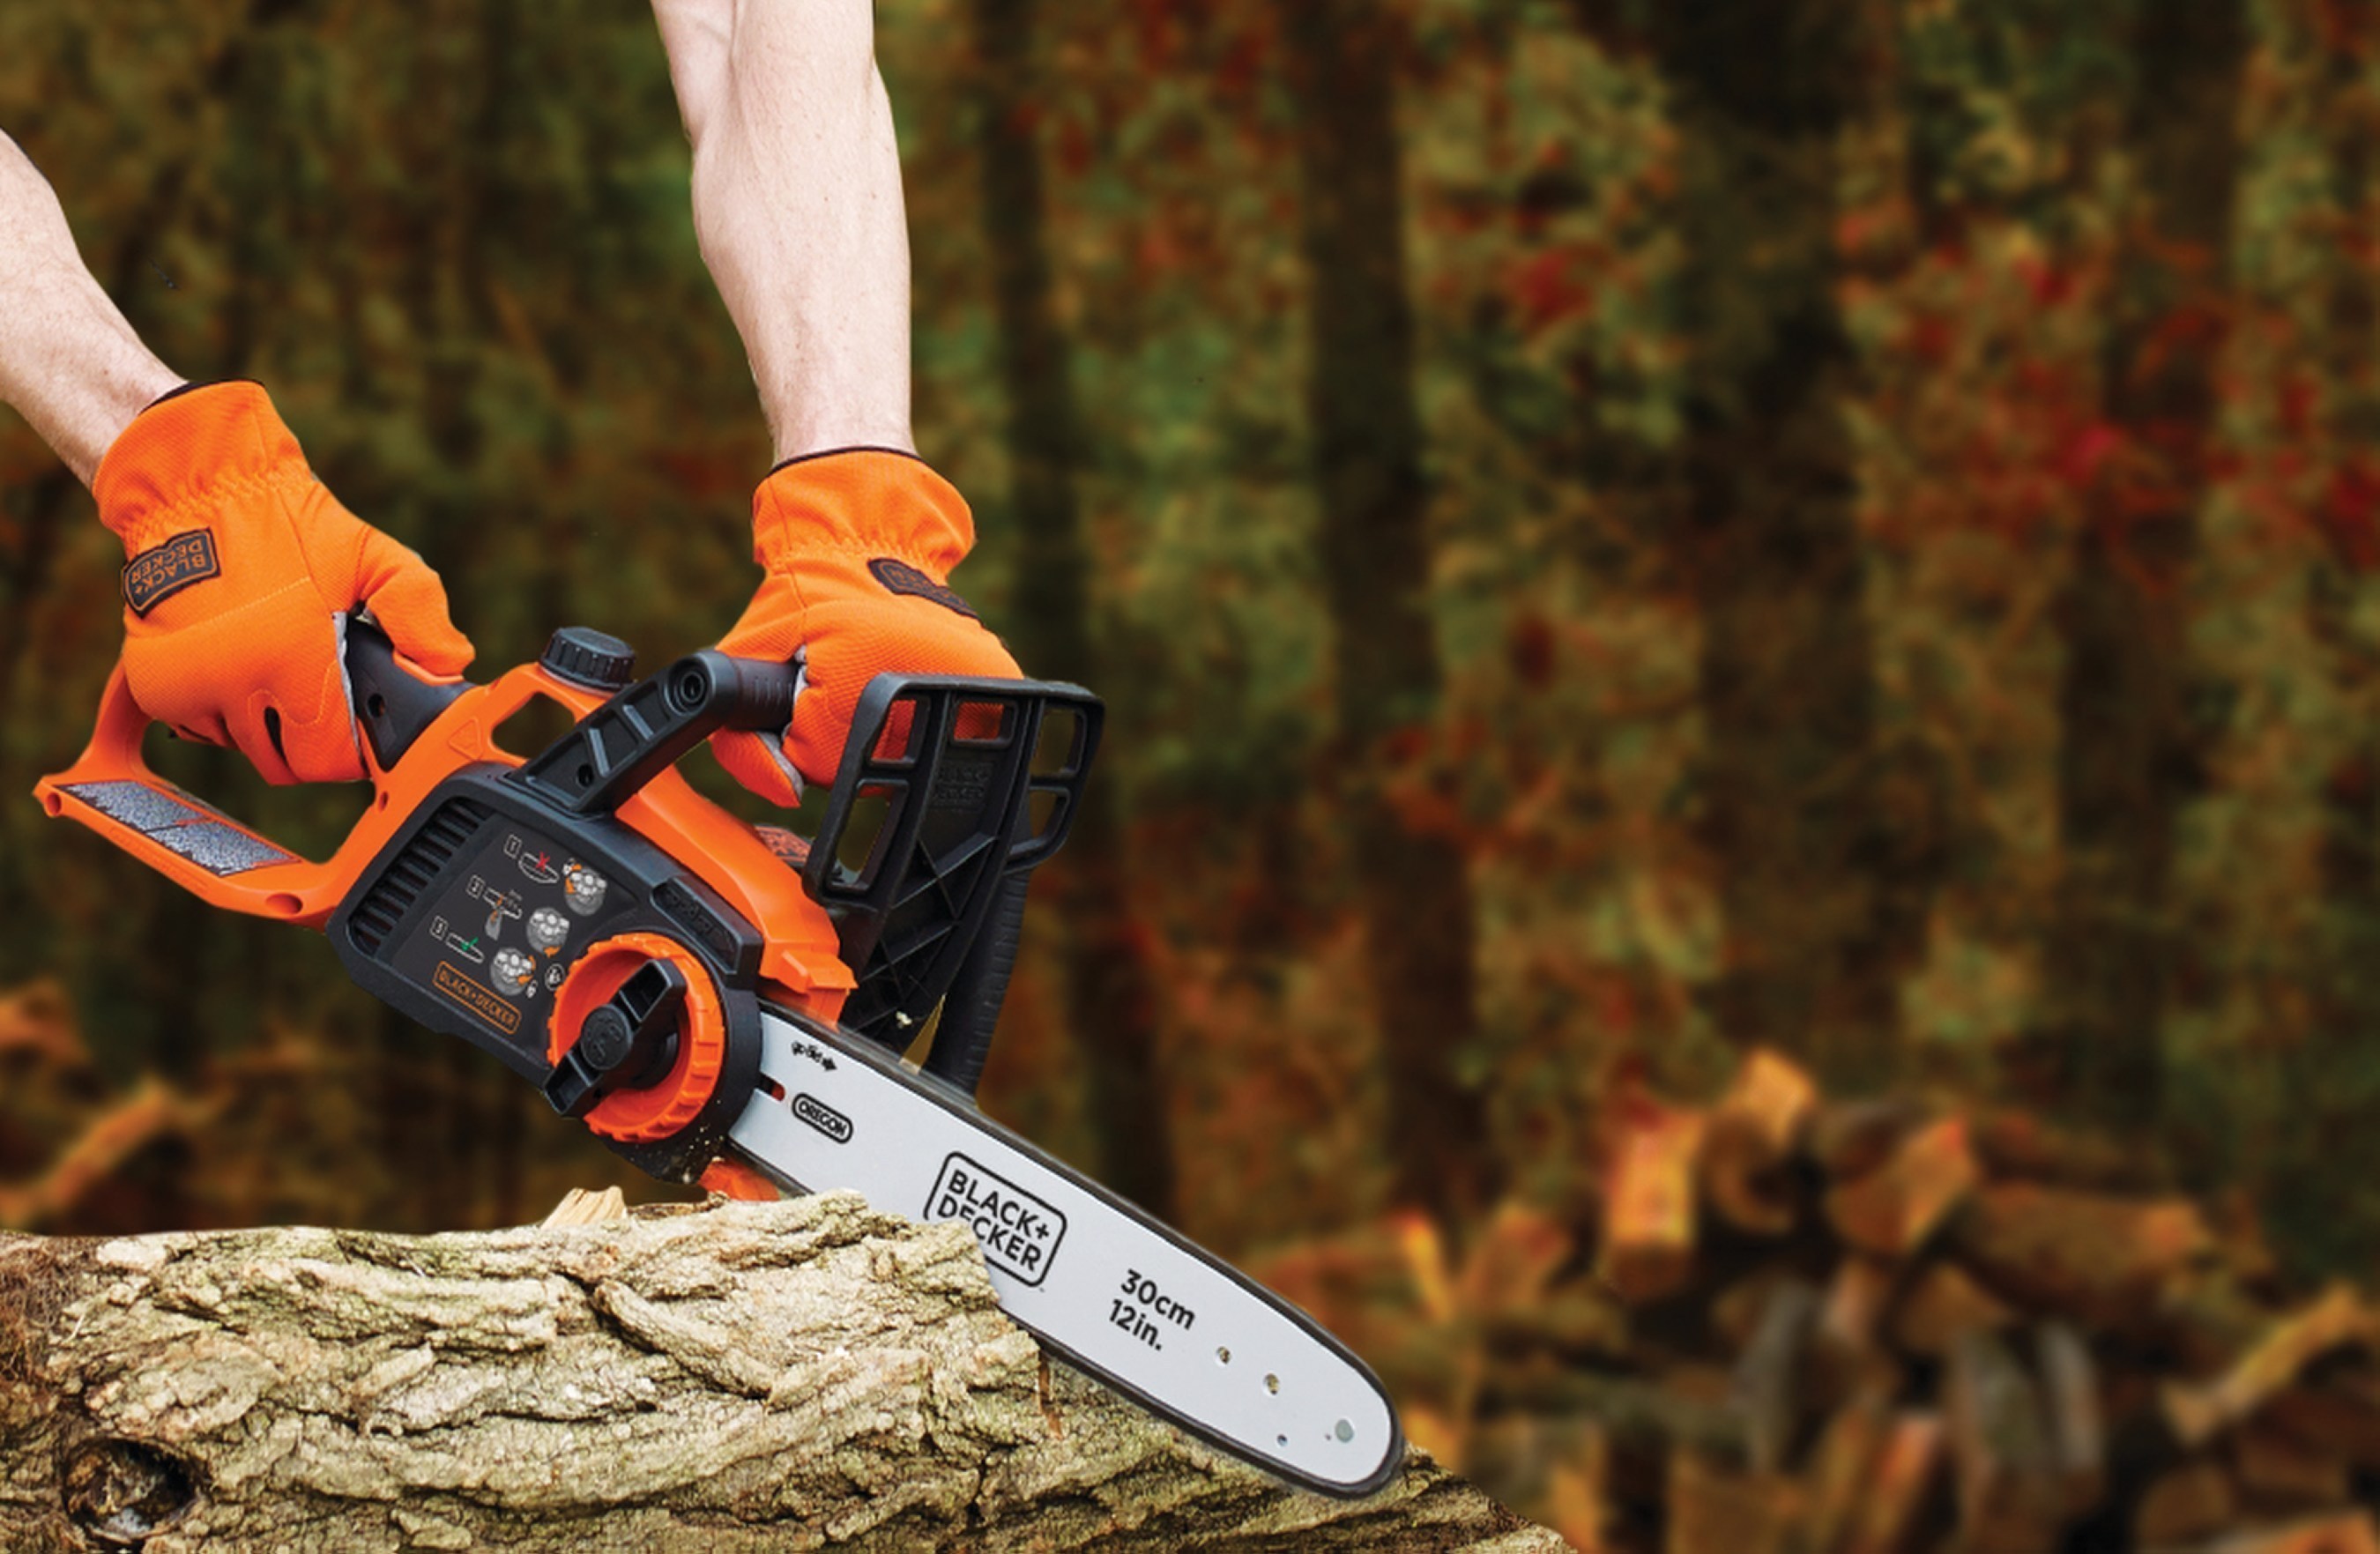 BLACK DECKER's new cordless and corded chainsaws are perfect choices when preparing for fall storms and winter weather. Trimming branches and loose limbs is a critical part of preparing for and cleaning up from storms. Cordless outdoor tools like BLACK DECKER's new 40V MAX* and 20V MAX* Lithium Ion Chainsaws offer convenience and maneuverability with the needed power for cutting through both dry wood and live logs. Corded outdoor tools like BLACK DECKER's 15A Corded Chainsaw, 12A Corded Chainsaw, and 6.5A Corded Pole Saw are also powerful, lightweight, and limit fatigue during extended use.